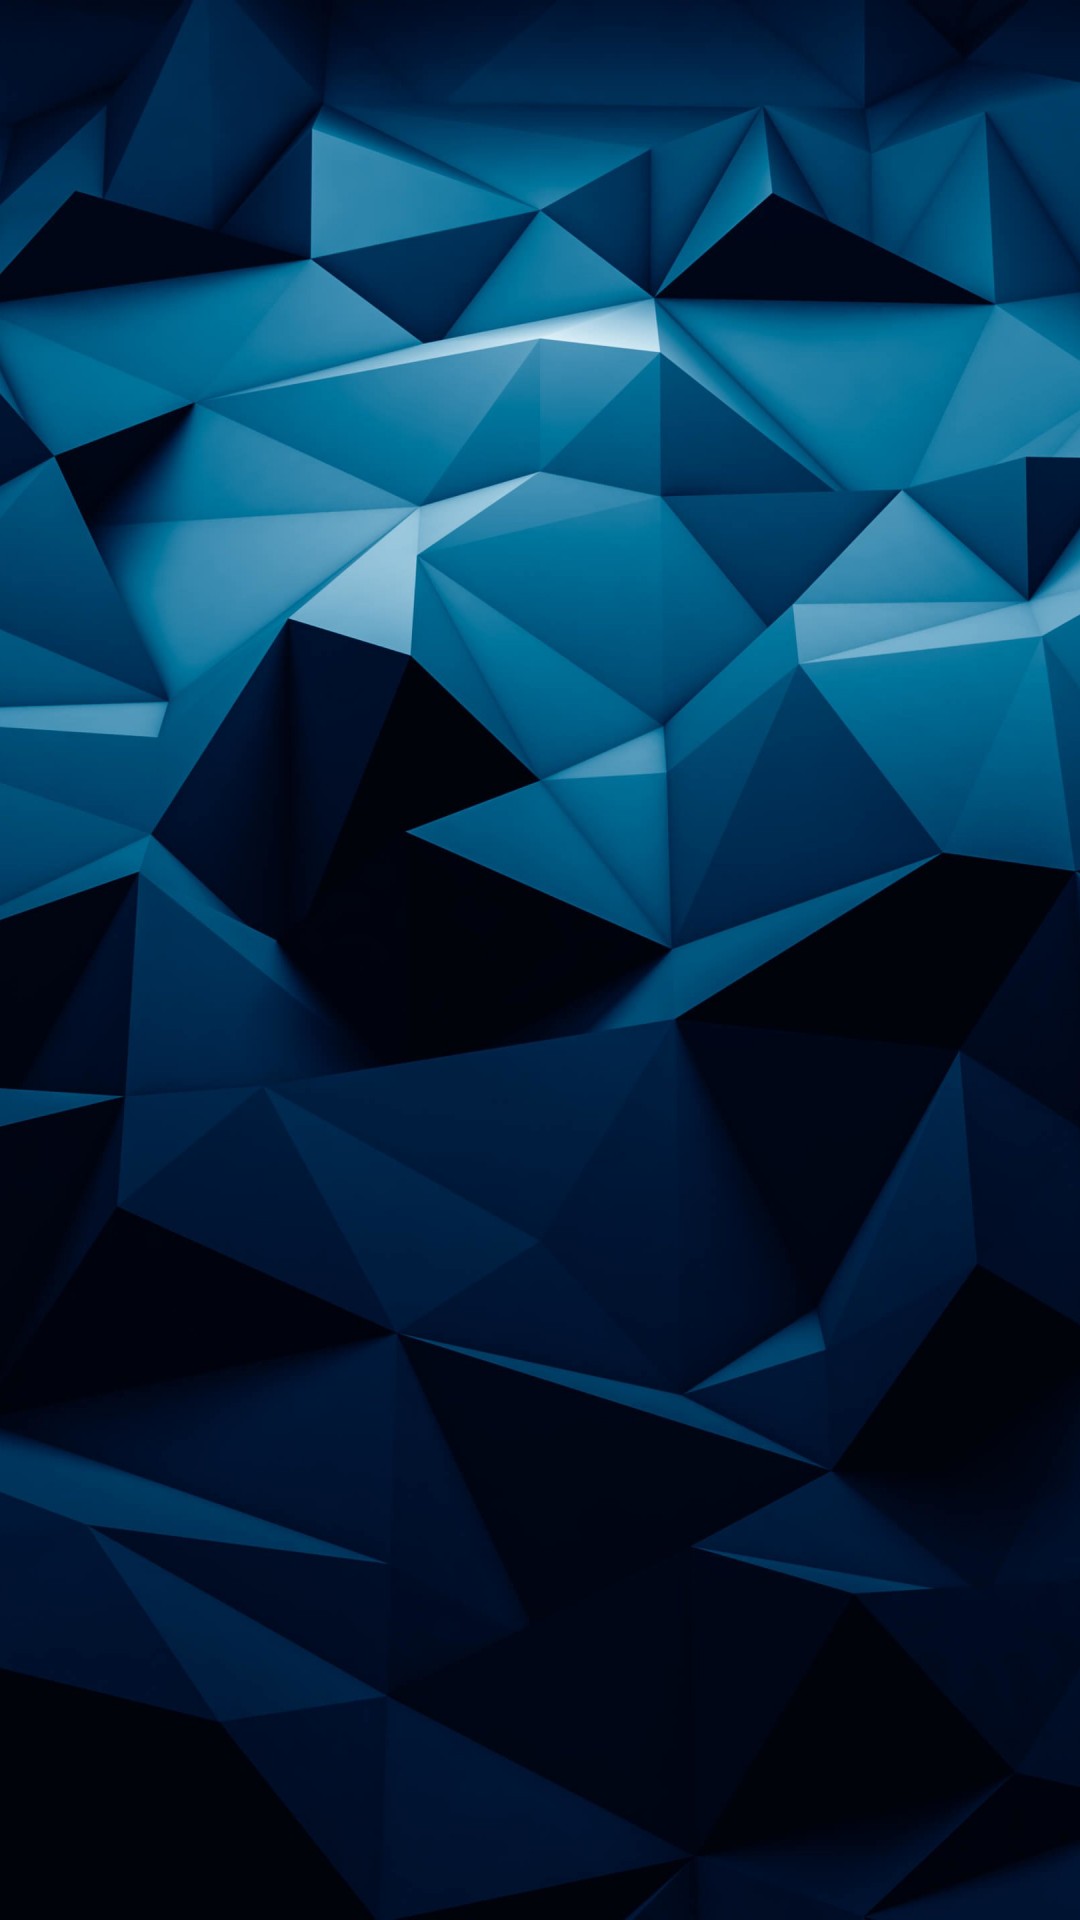 The Next Polylog Wallpaper for SAMSUNG Galaxy S5